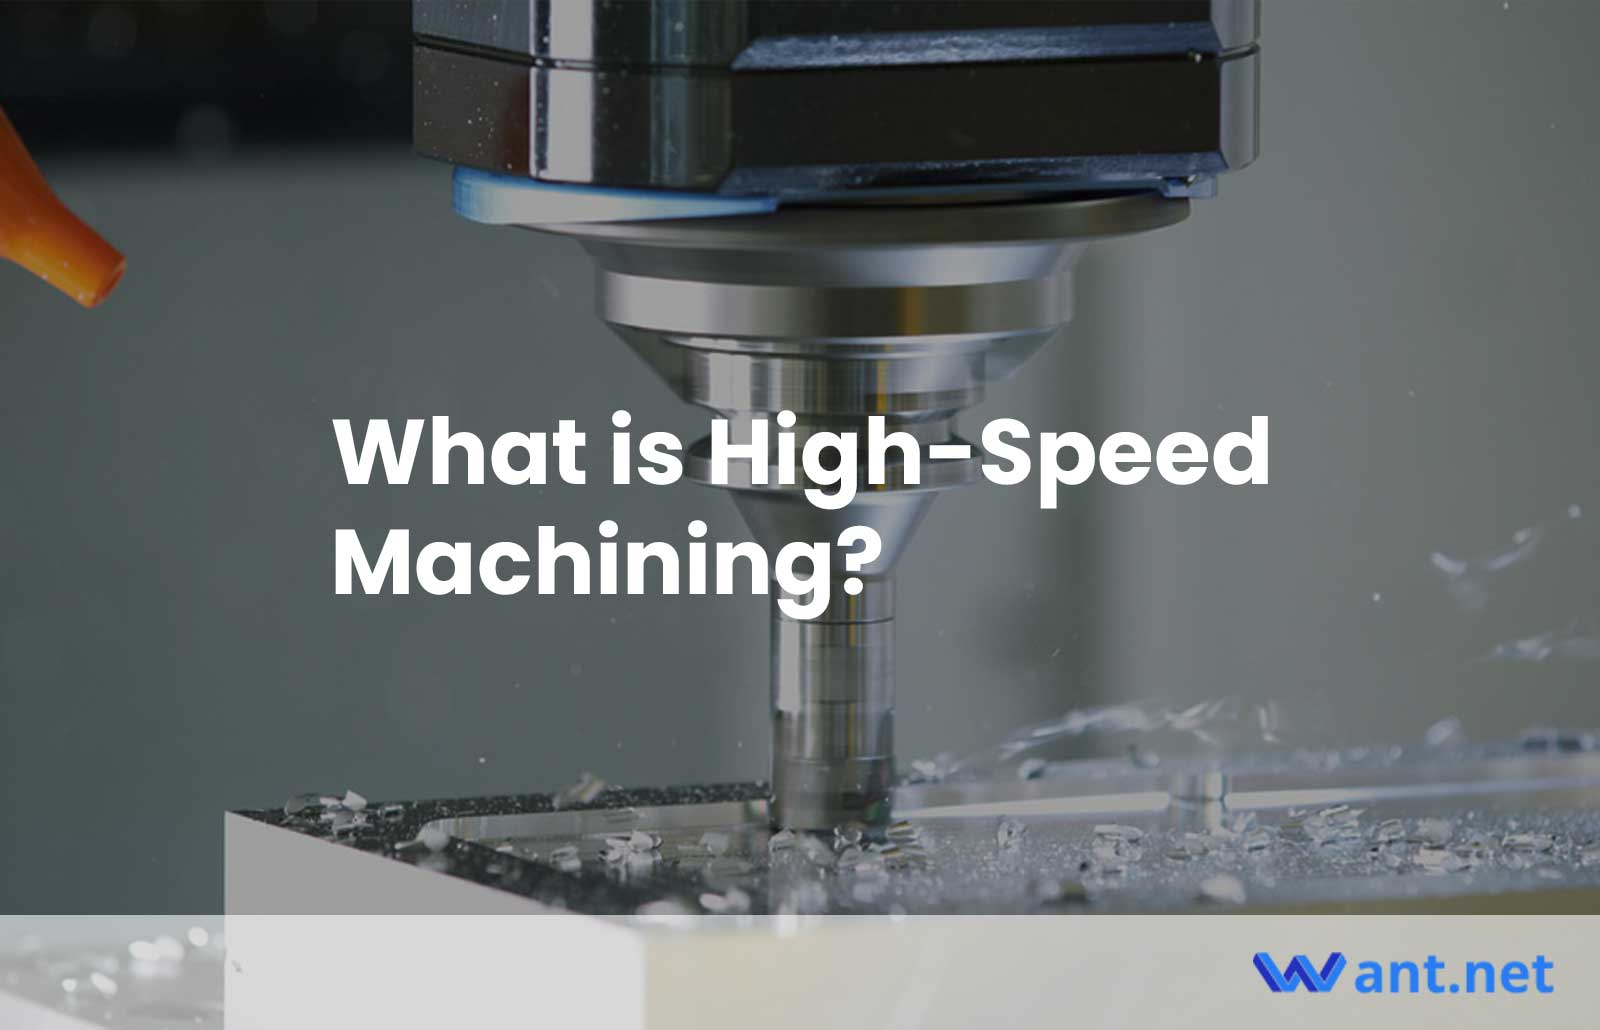 What is High-Speed Machining?